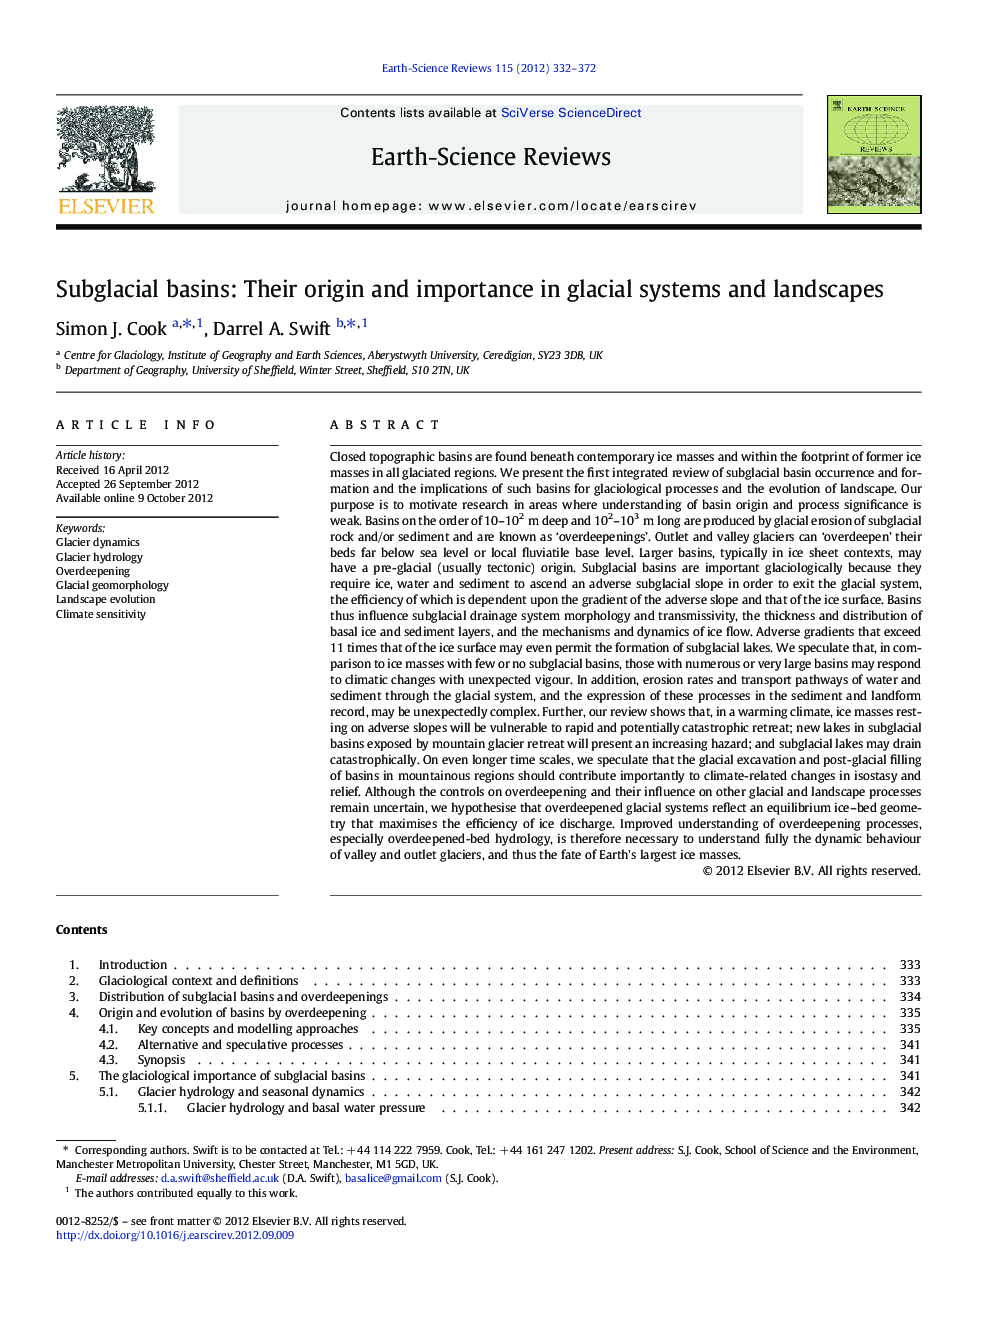 Subglacial basins: Their origin and importance in glacial systems and landscapes